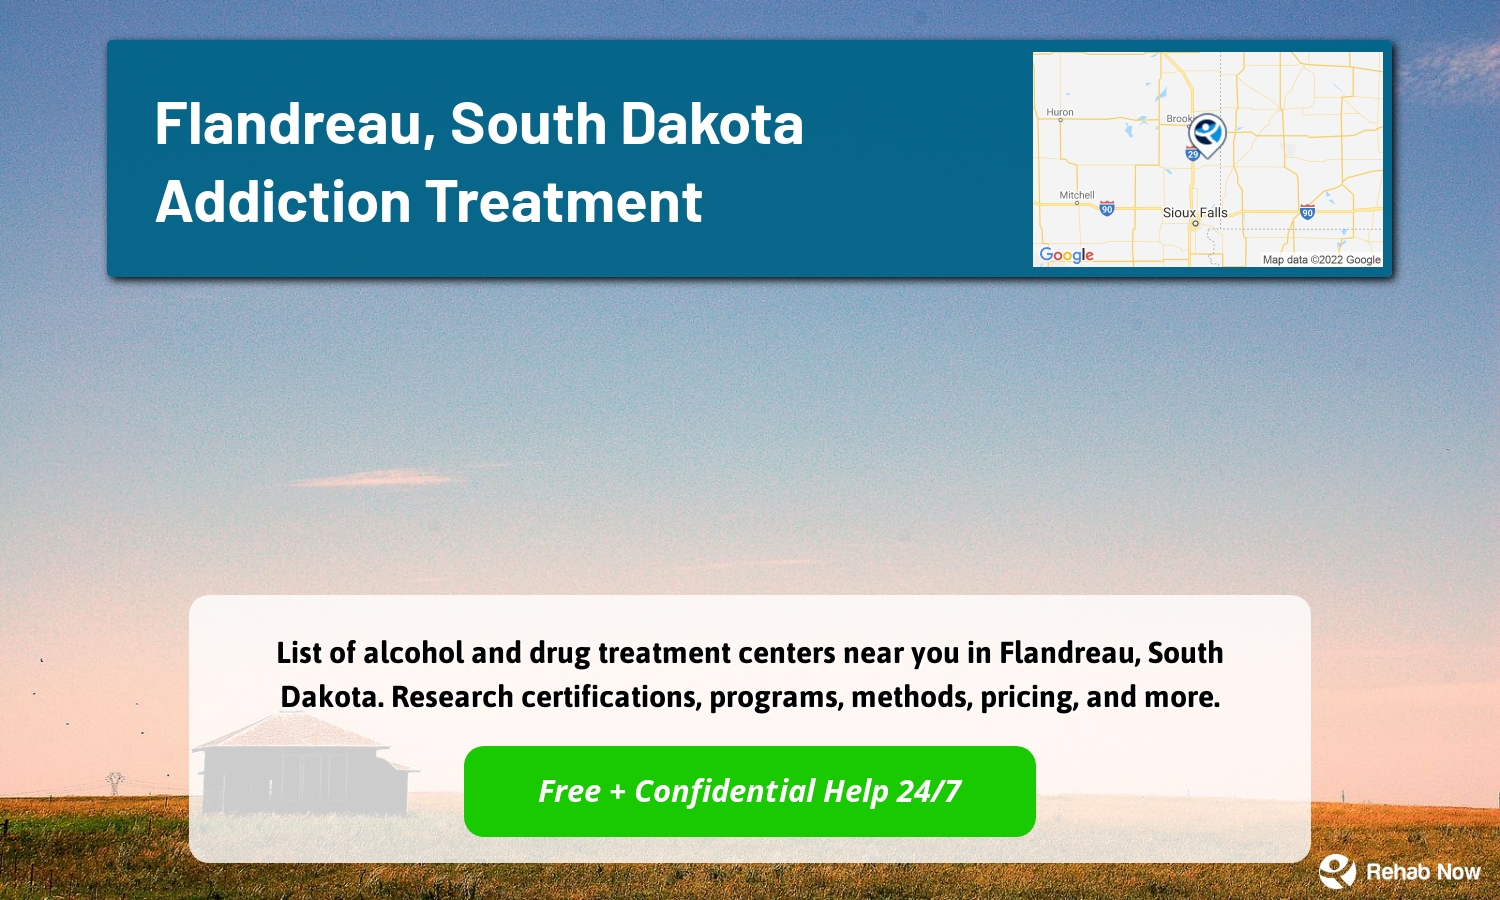 List of alcohol and drug treatment centers near you in Flandreau, South Dakota. Research certifications, programs, methods, pricing, and more.